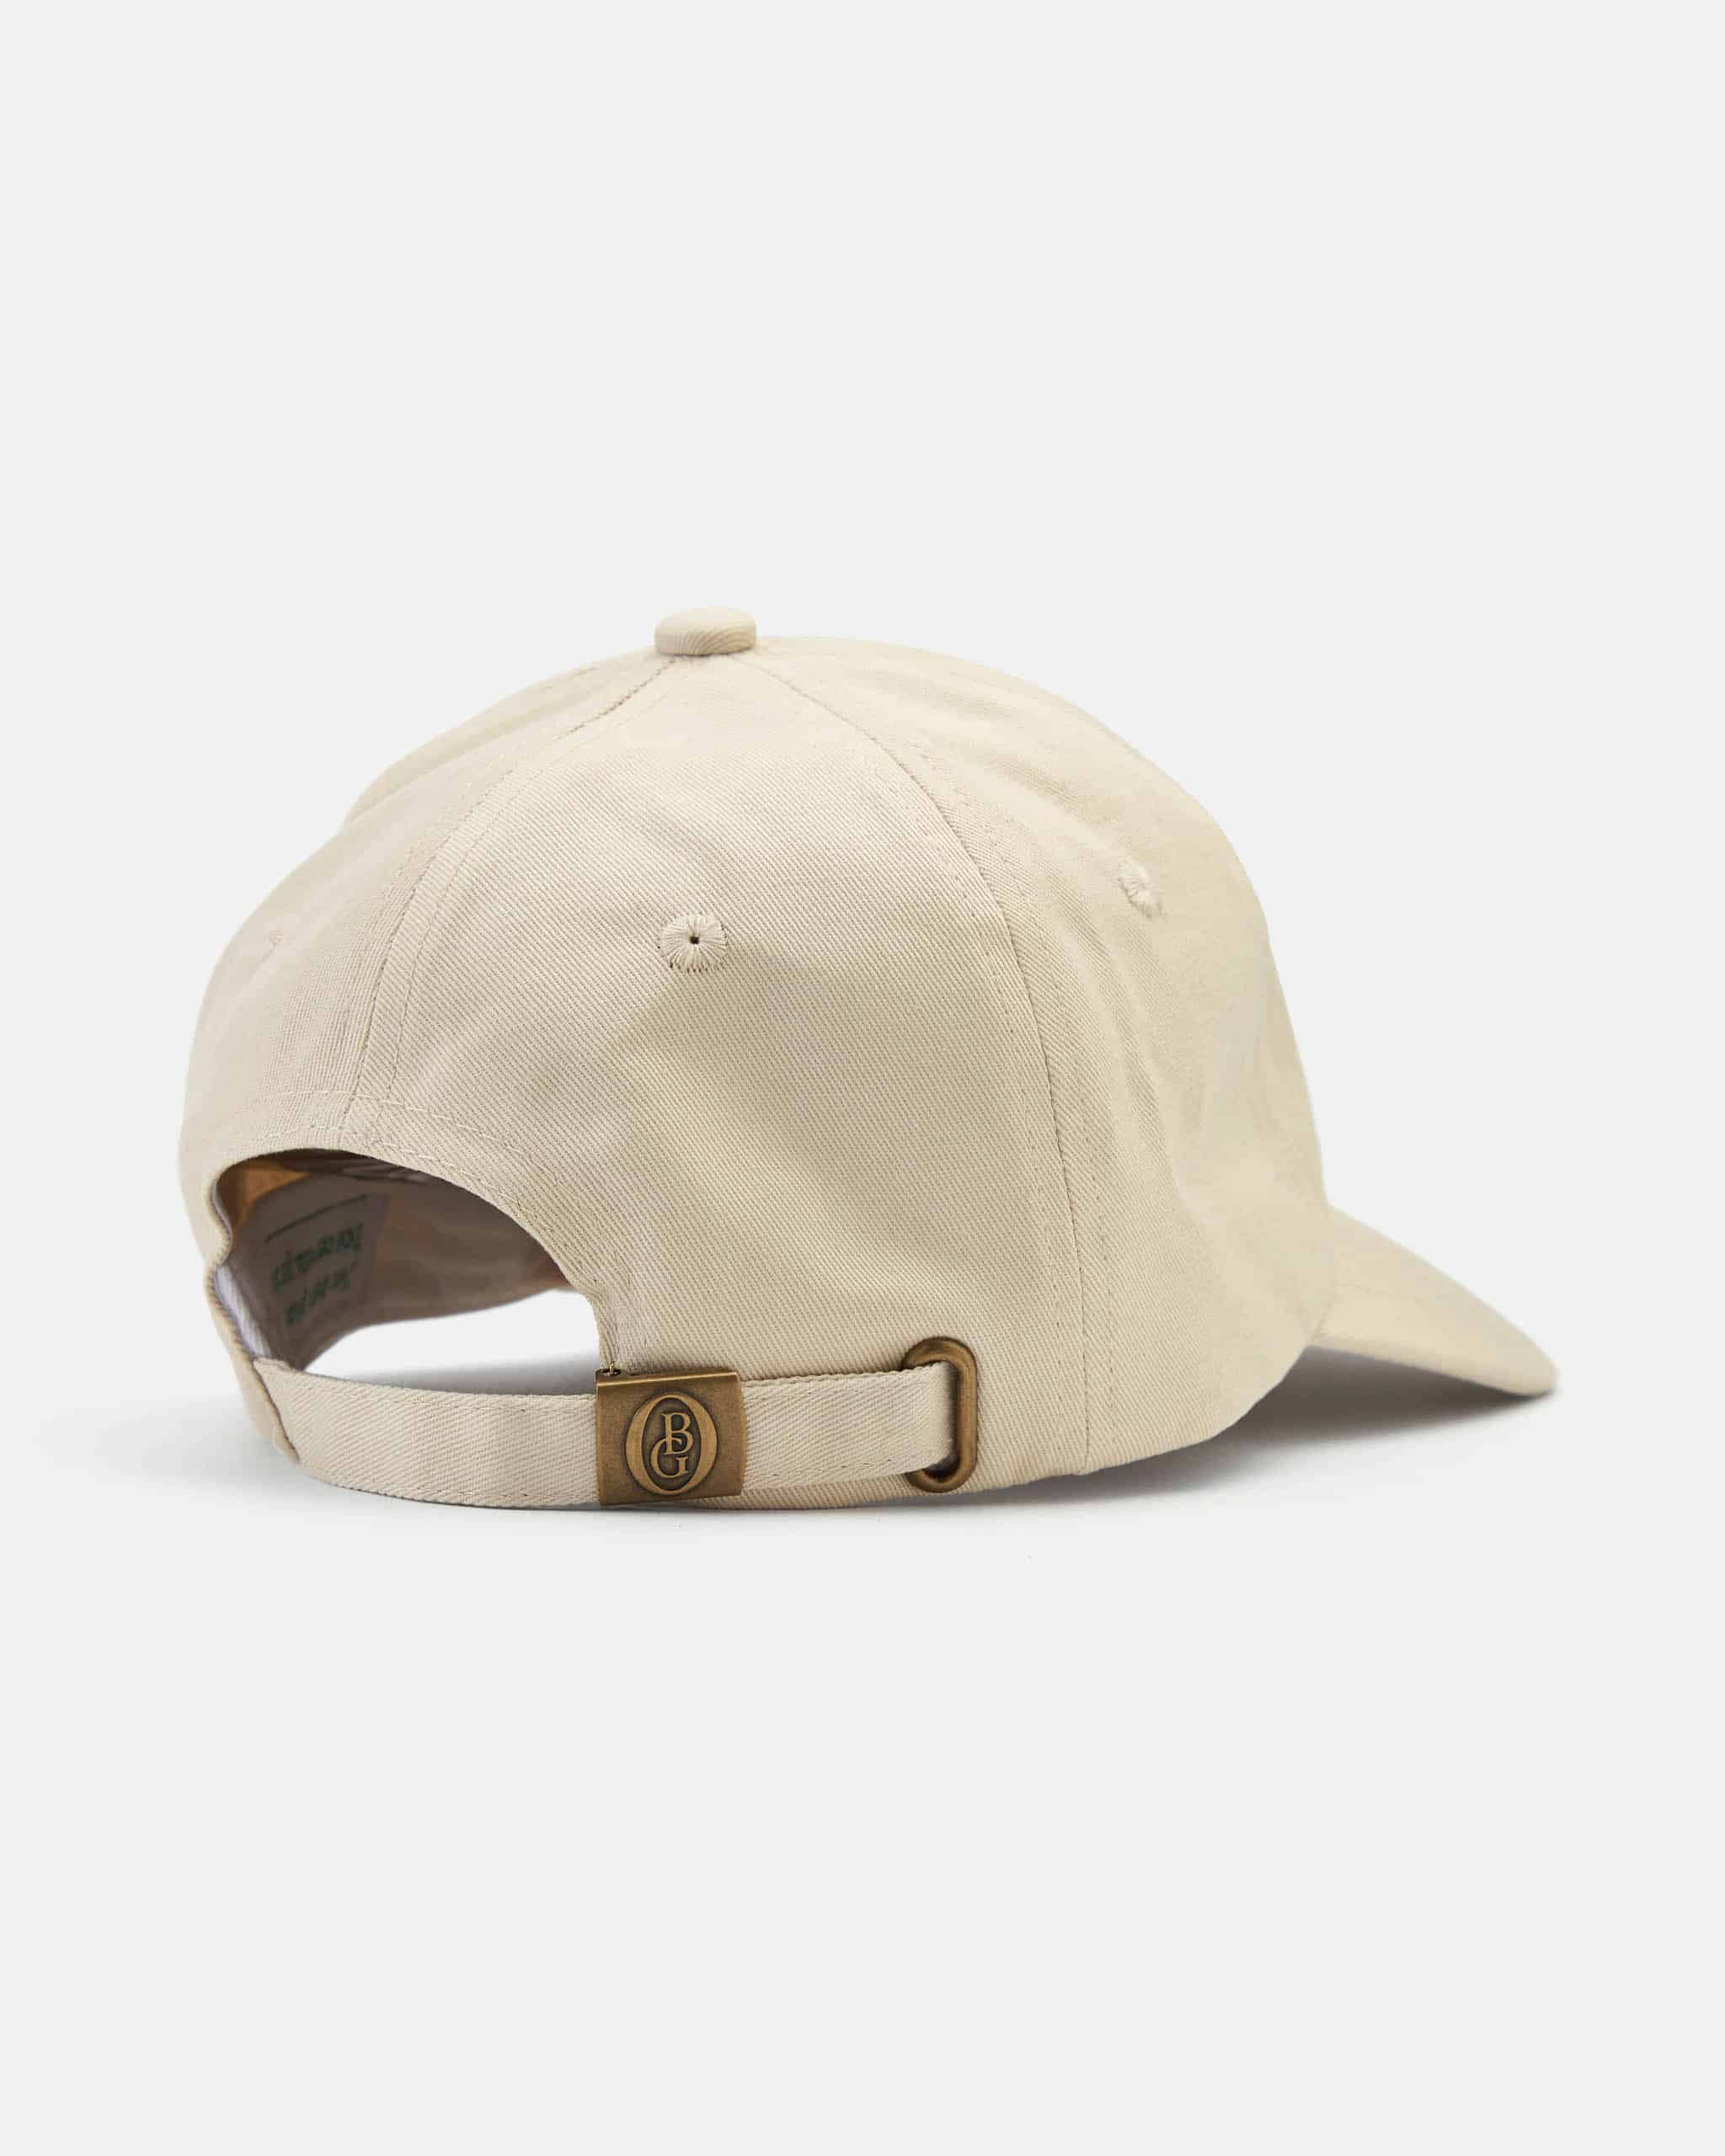 Travelogue 'Au Pays Basque' limited edition cap off white image 2